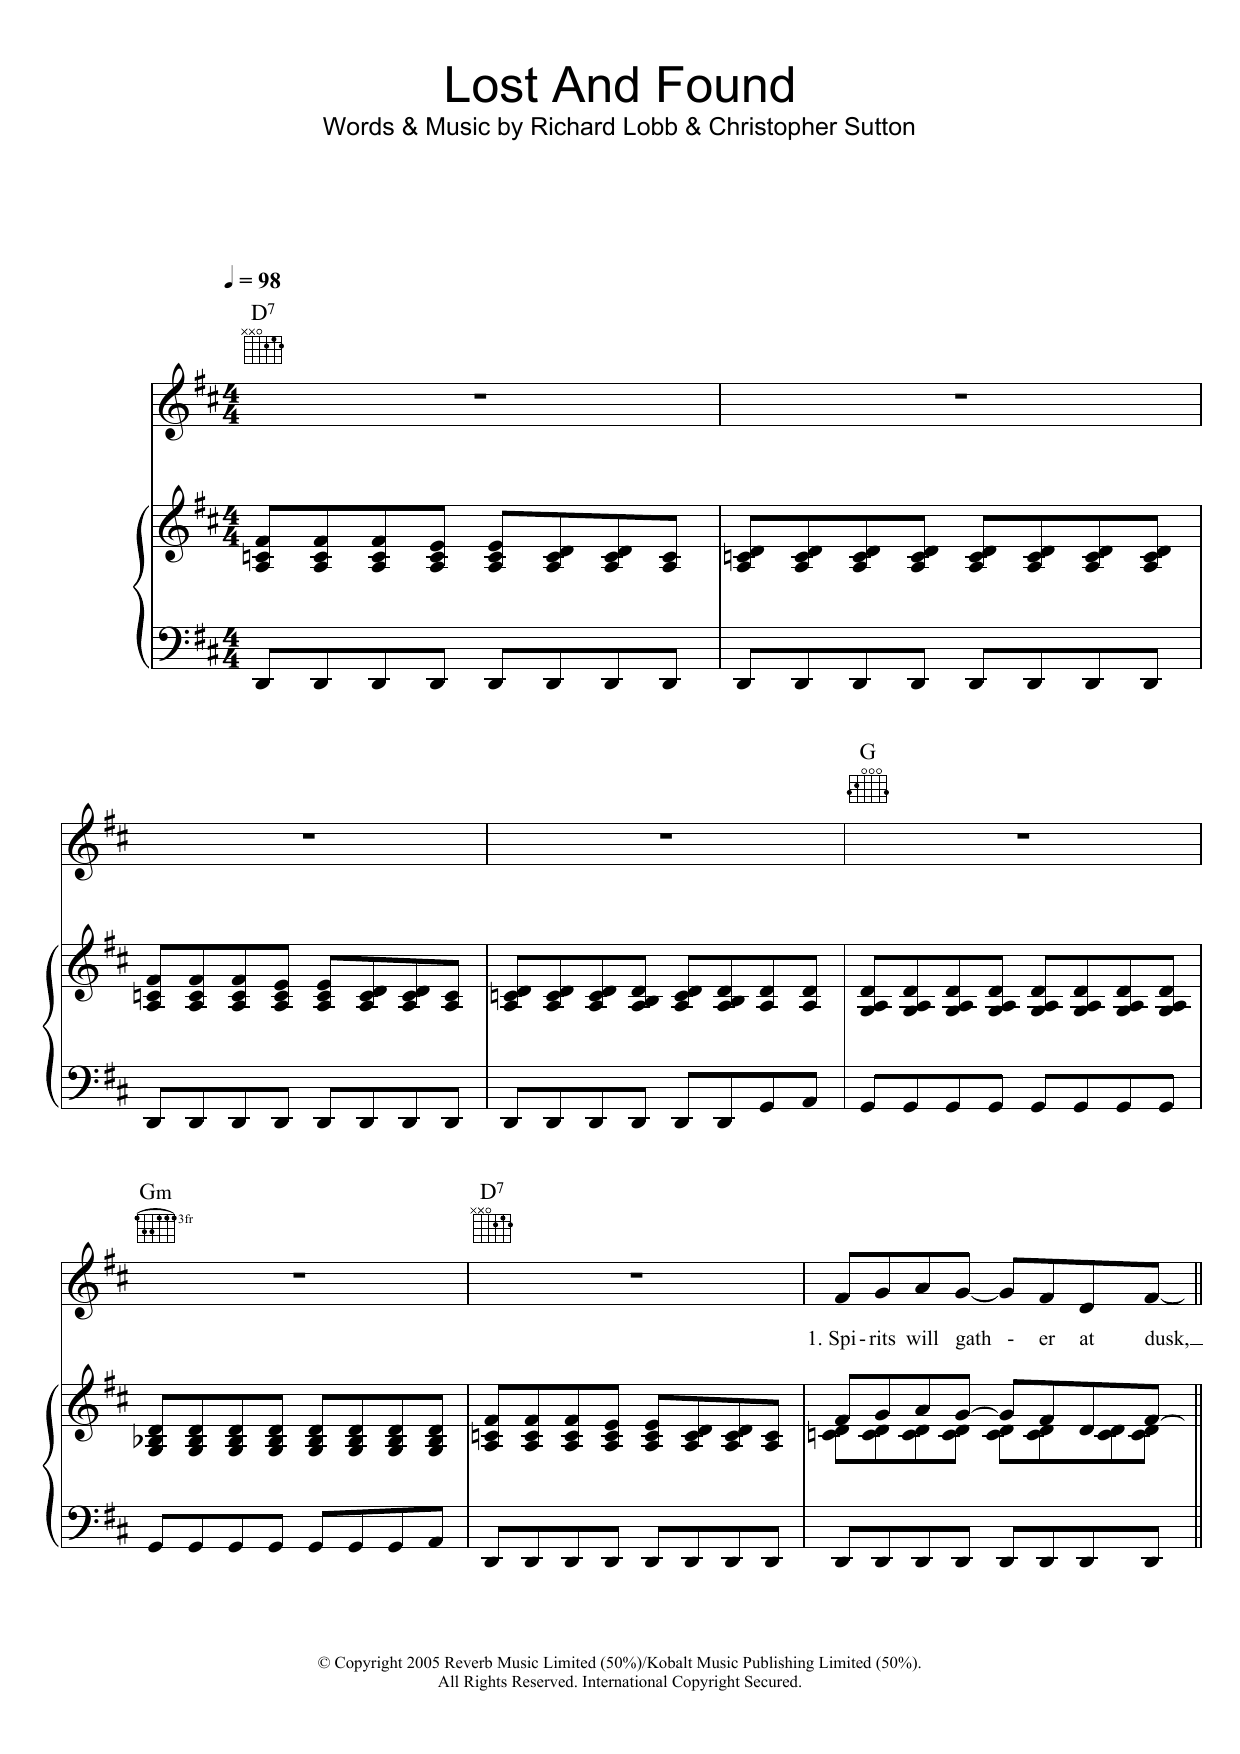 Download Matt Cardle Lost And Found Sheet Music